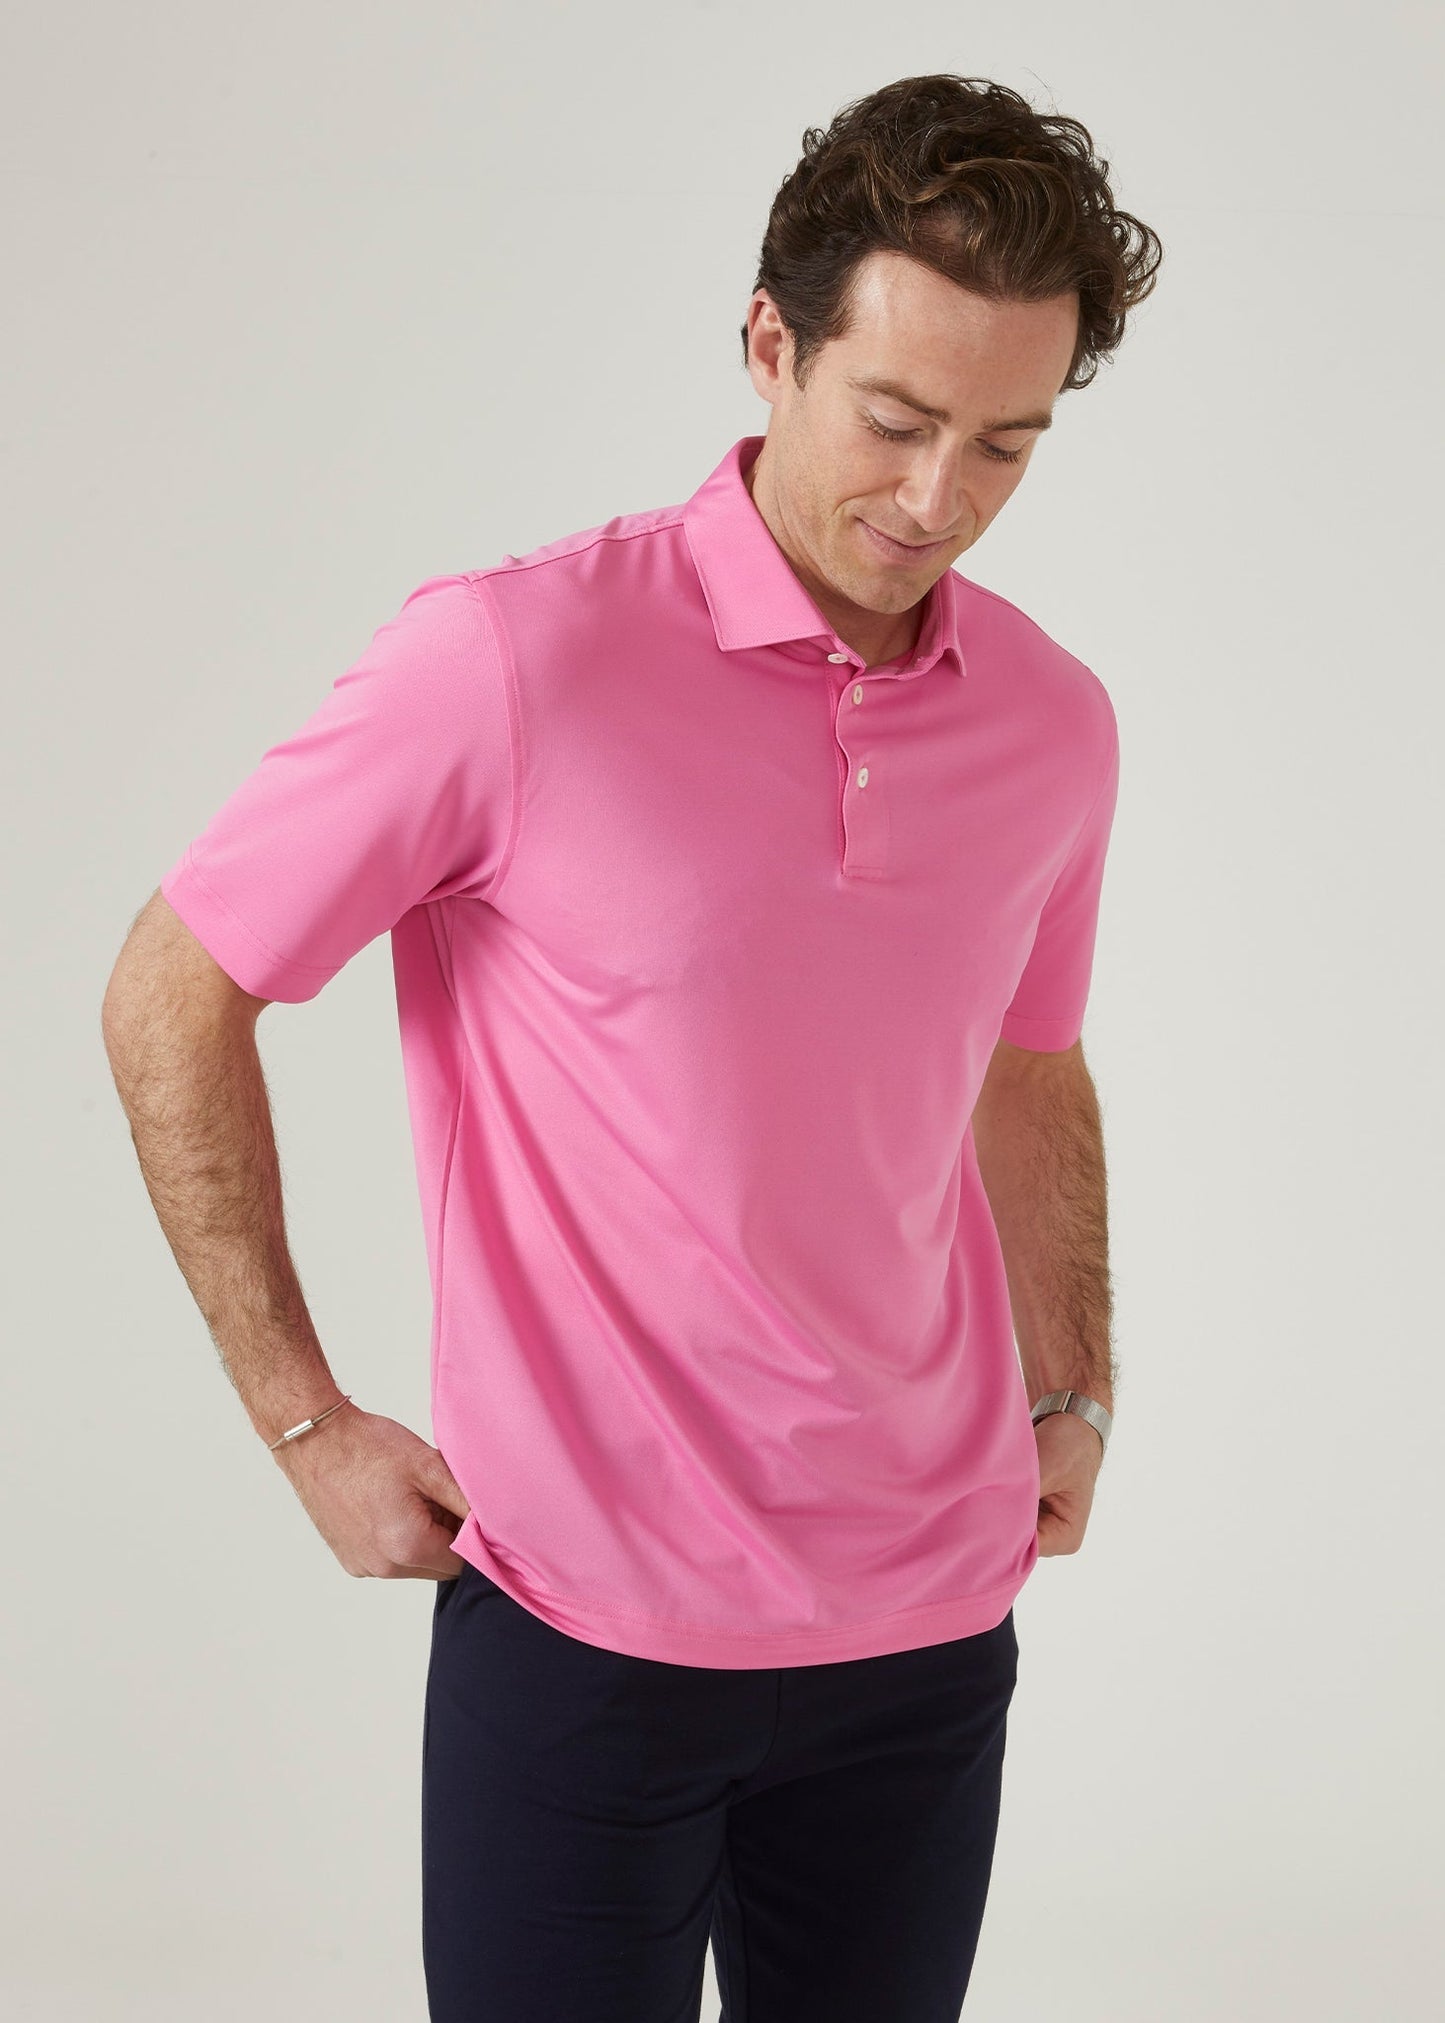 Men's 3 button polo shirt in carnation pink.